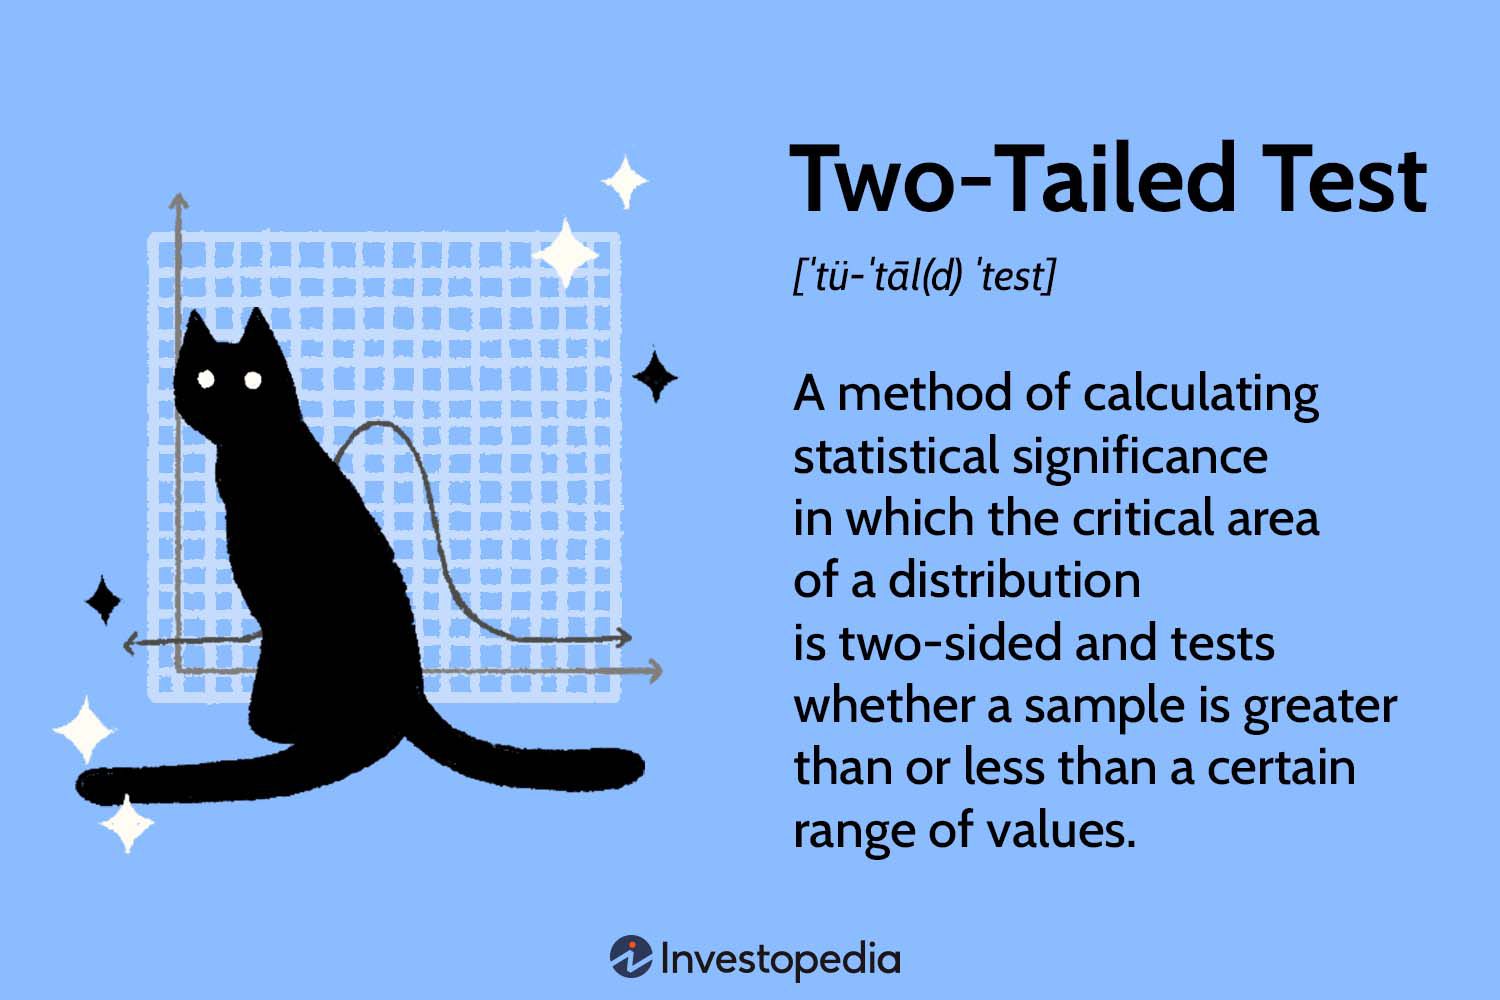 example of 2 tailed hypothesis